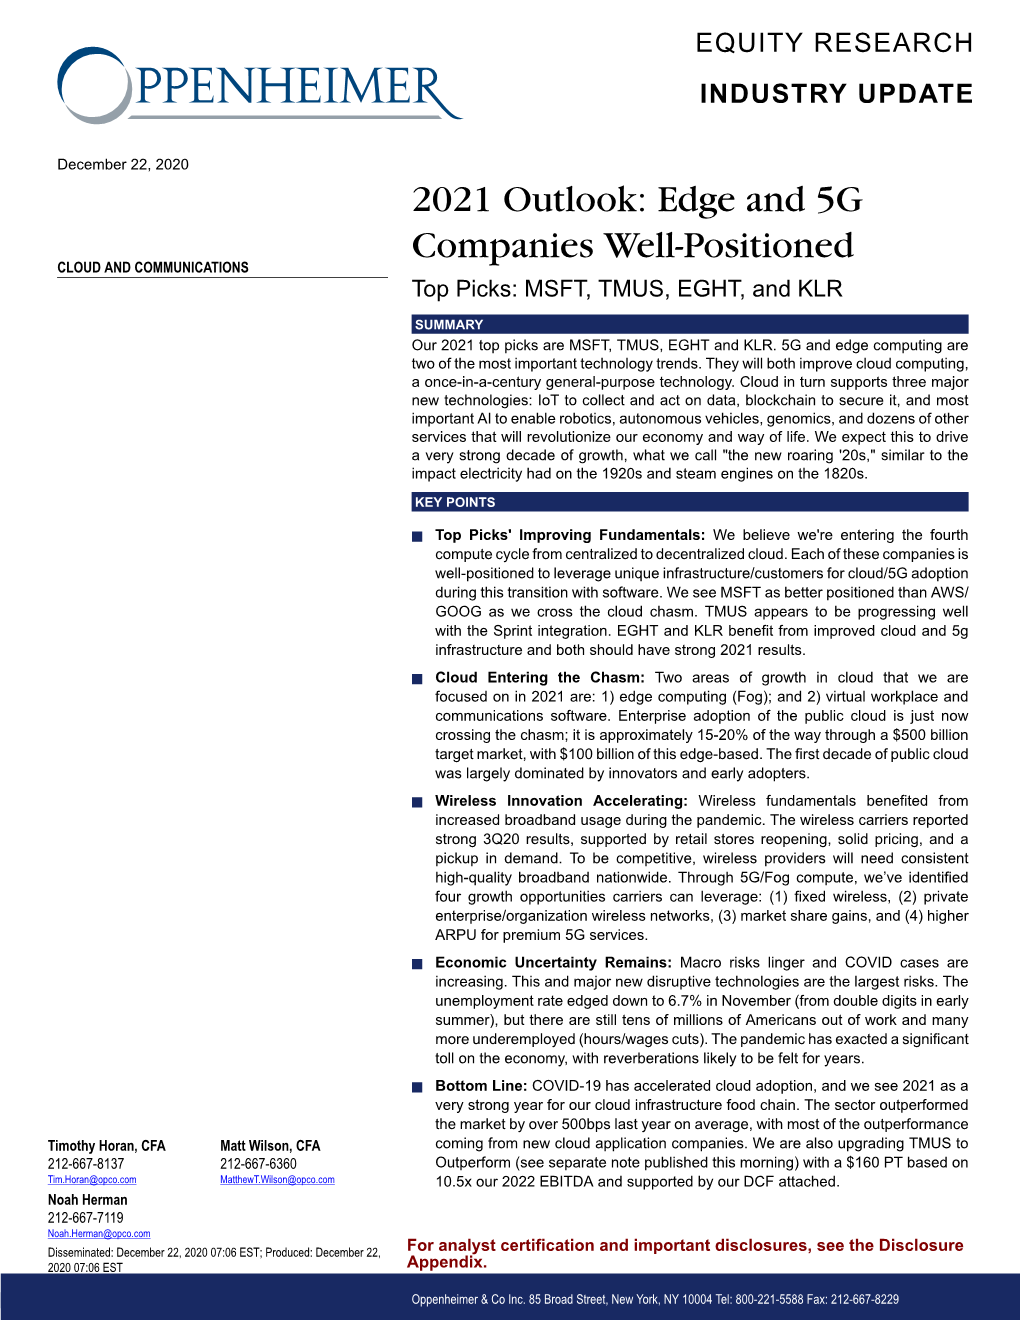 Research Oppenheimer 2021 Outlook: Edge and 5G Companies Well